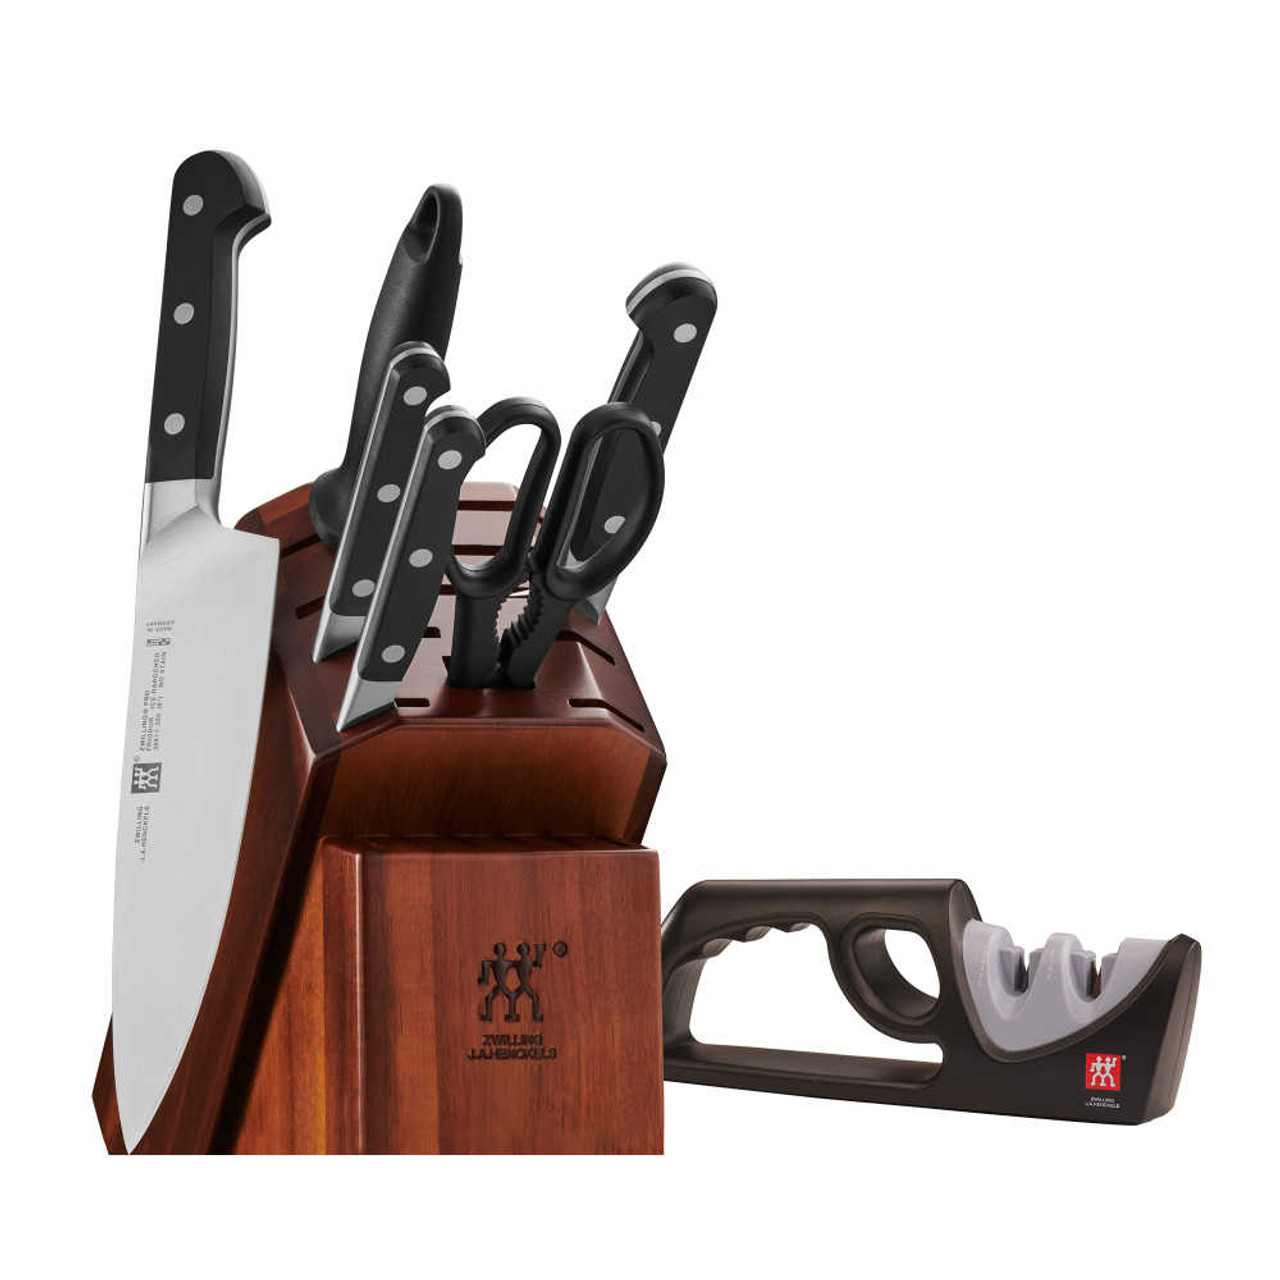 https://cdn11.bigcommerce.com/s-hccytny0od/images/stencil/1280x1280/products/4364/17001/Zwilling_Pro_8-Piece_Knife_Block_Set_with_Sharpener__70424.1634312027.jpg?c=2?imbypass=on